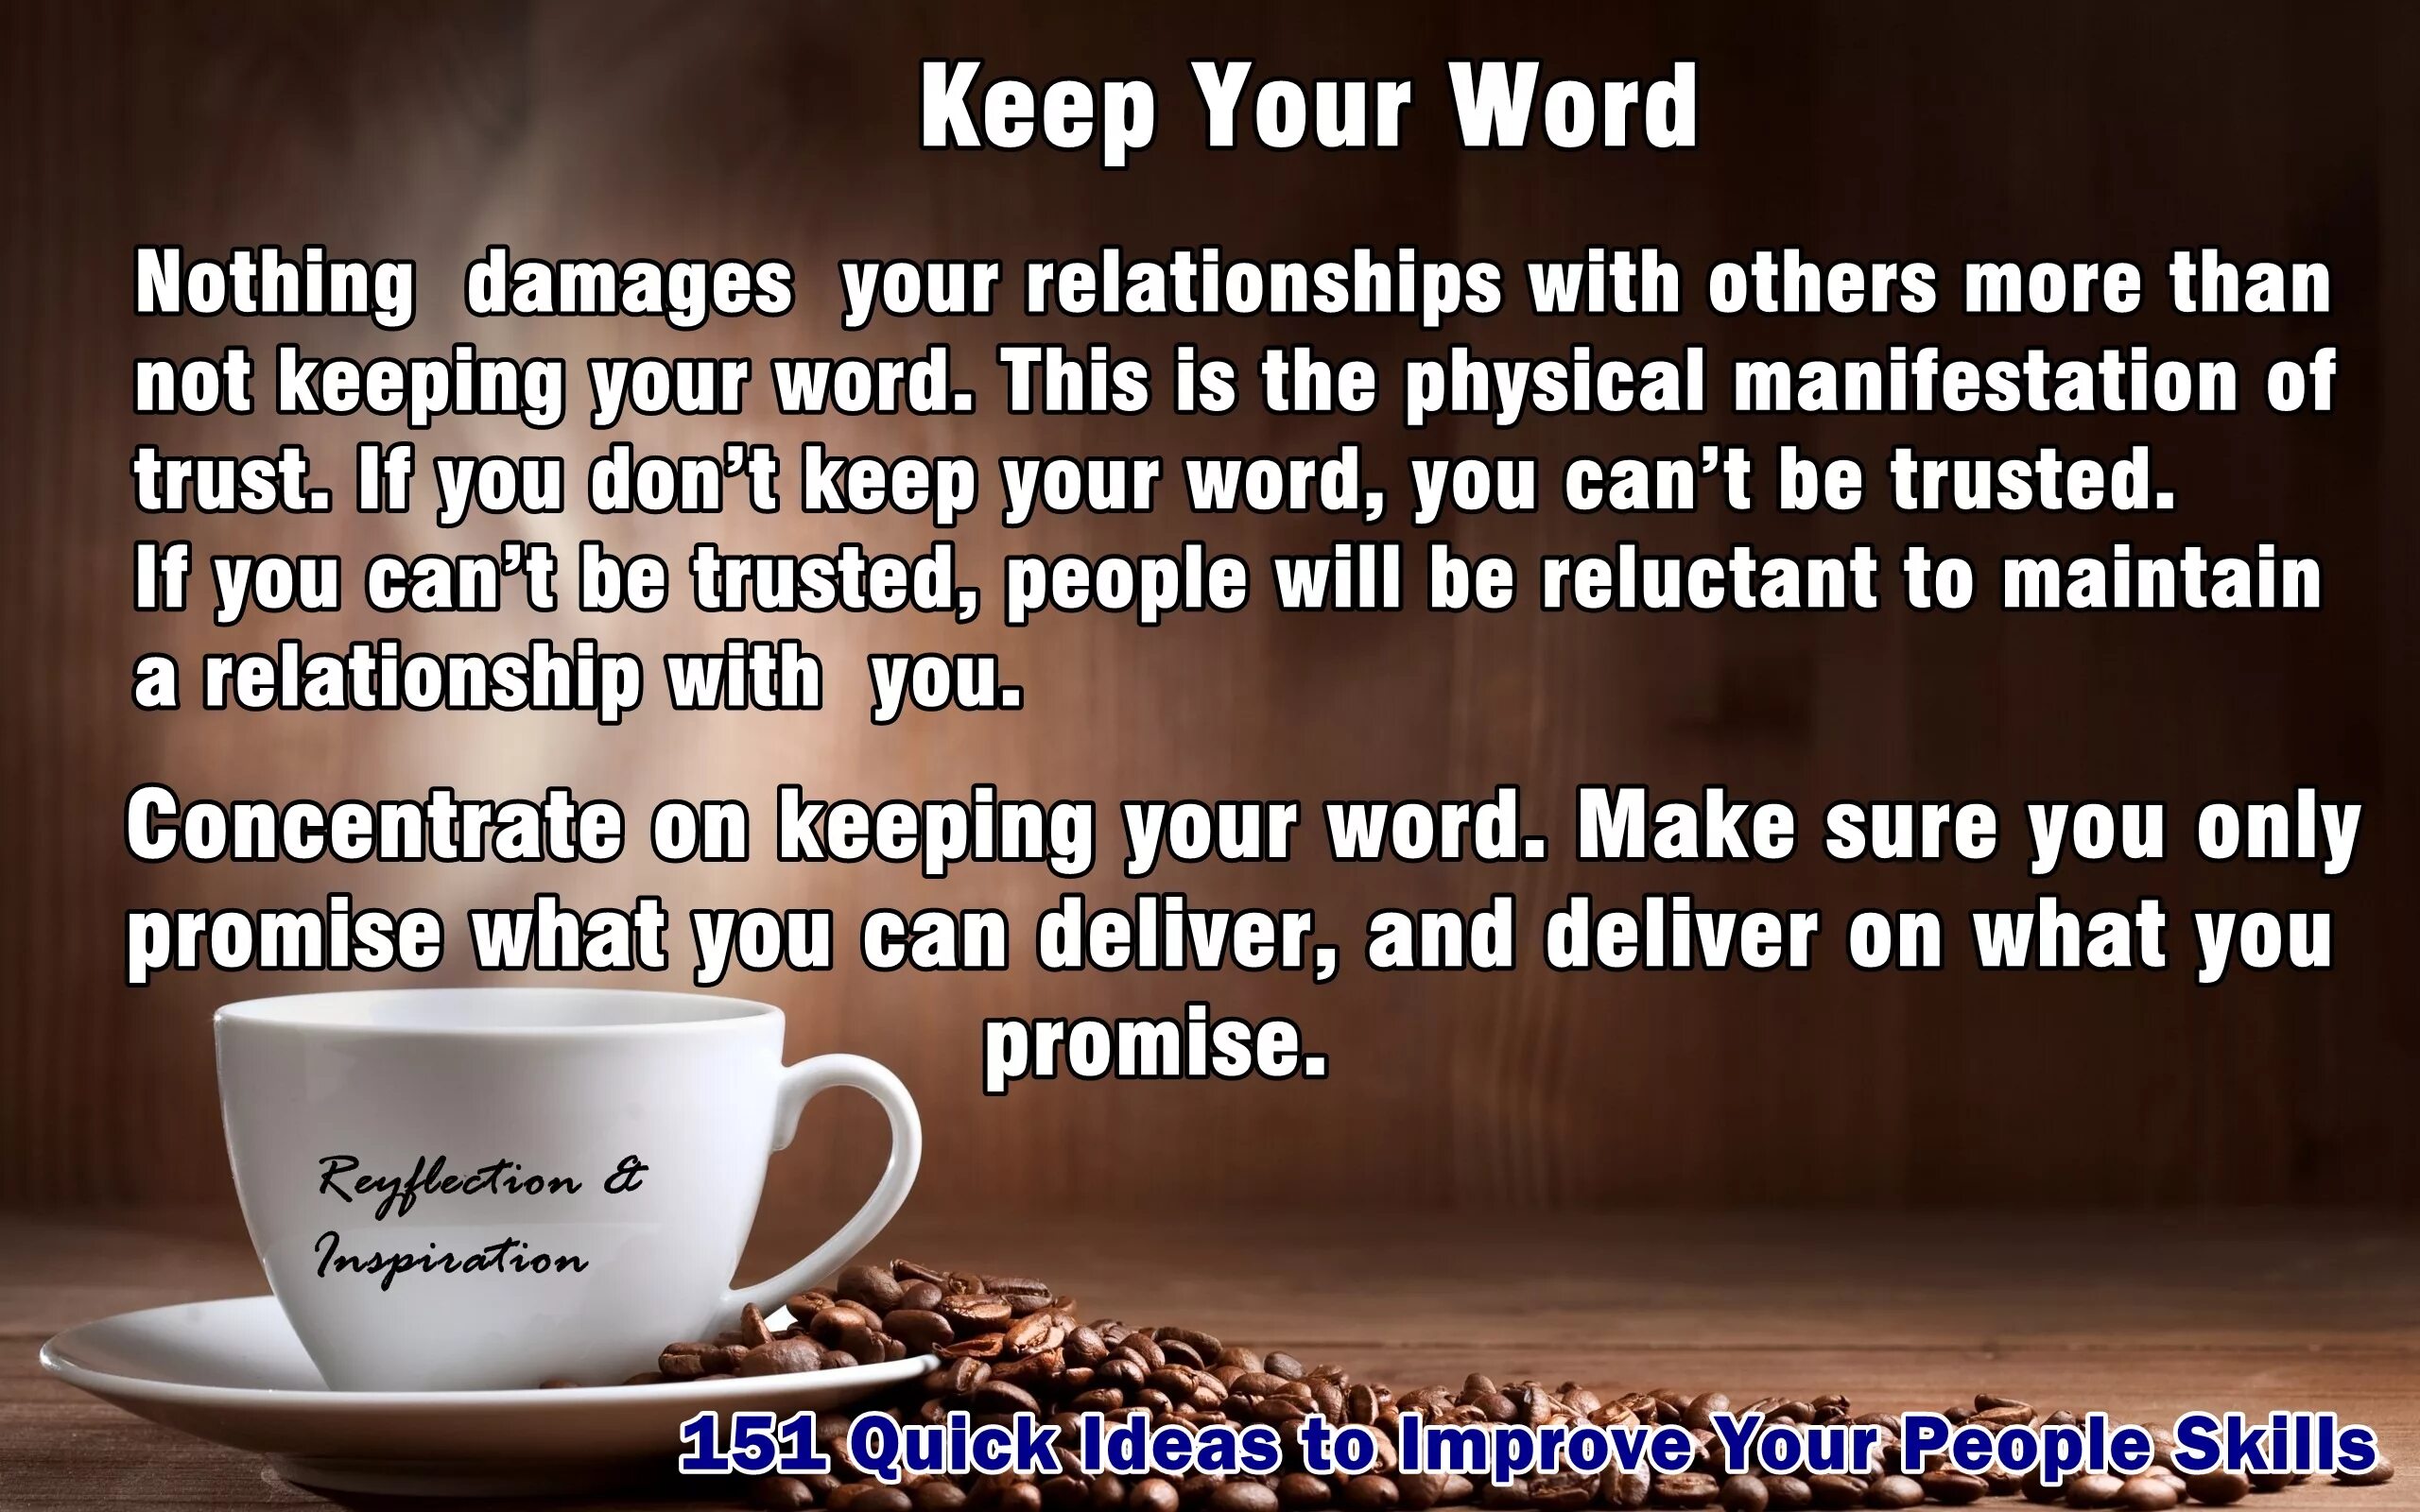 Be true to your Word. You must keep Vow. Promise what we can deliver and deliver what we Promise. Yours to keep перевод